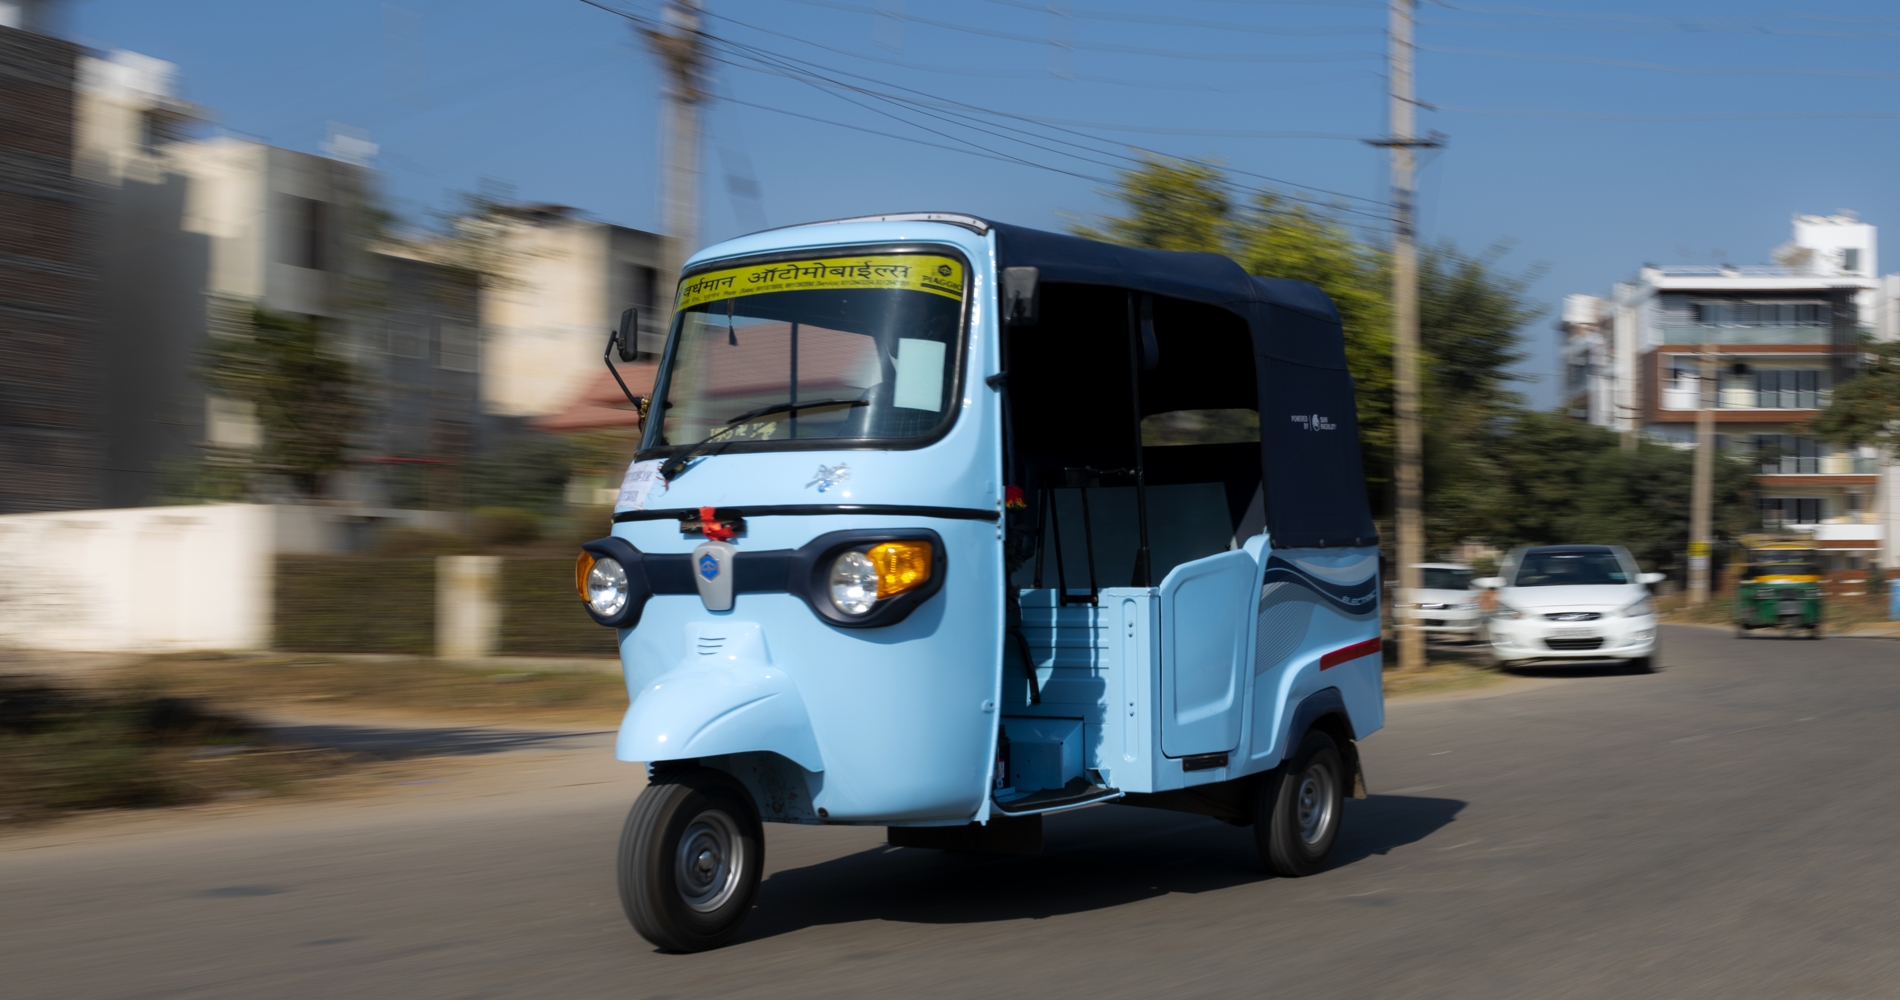 From tuk-tuks to trucks: A smart way to power electric vehicles - Microsoft Stories India